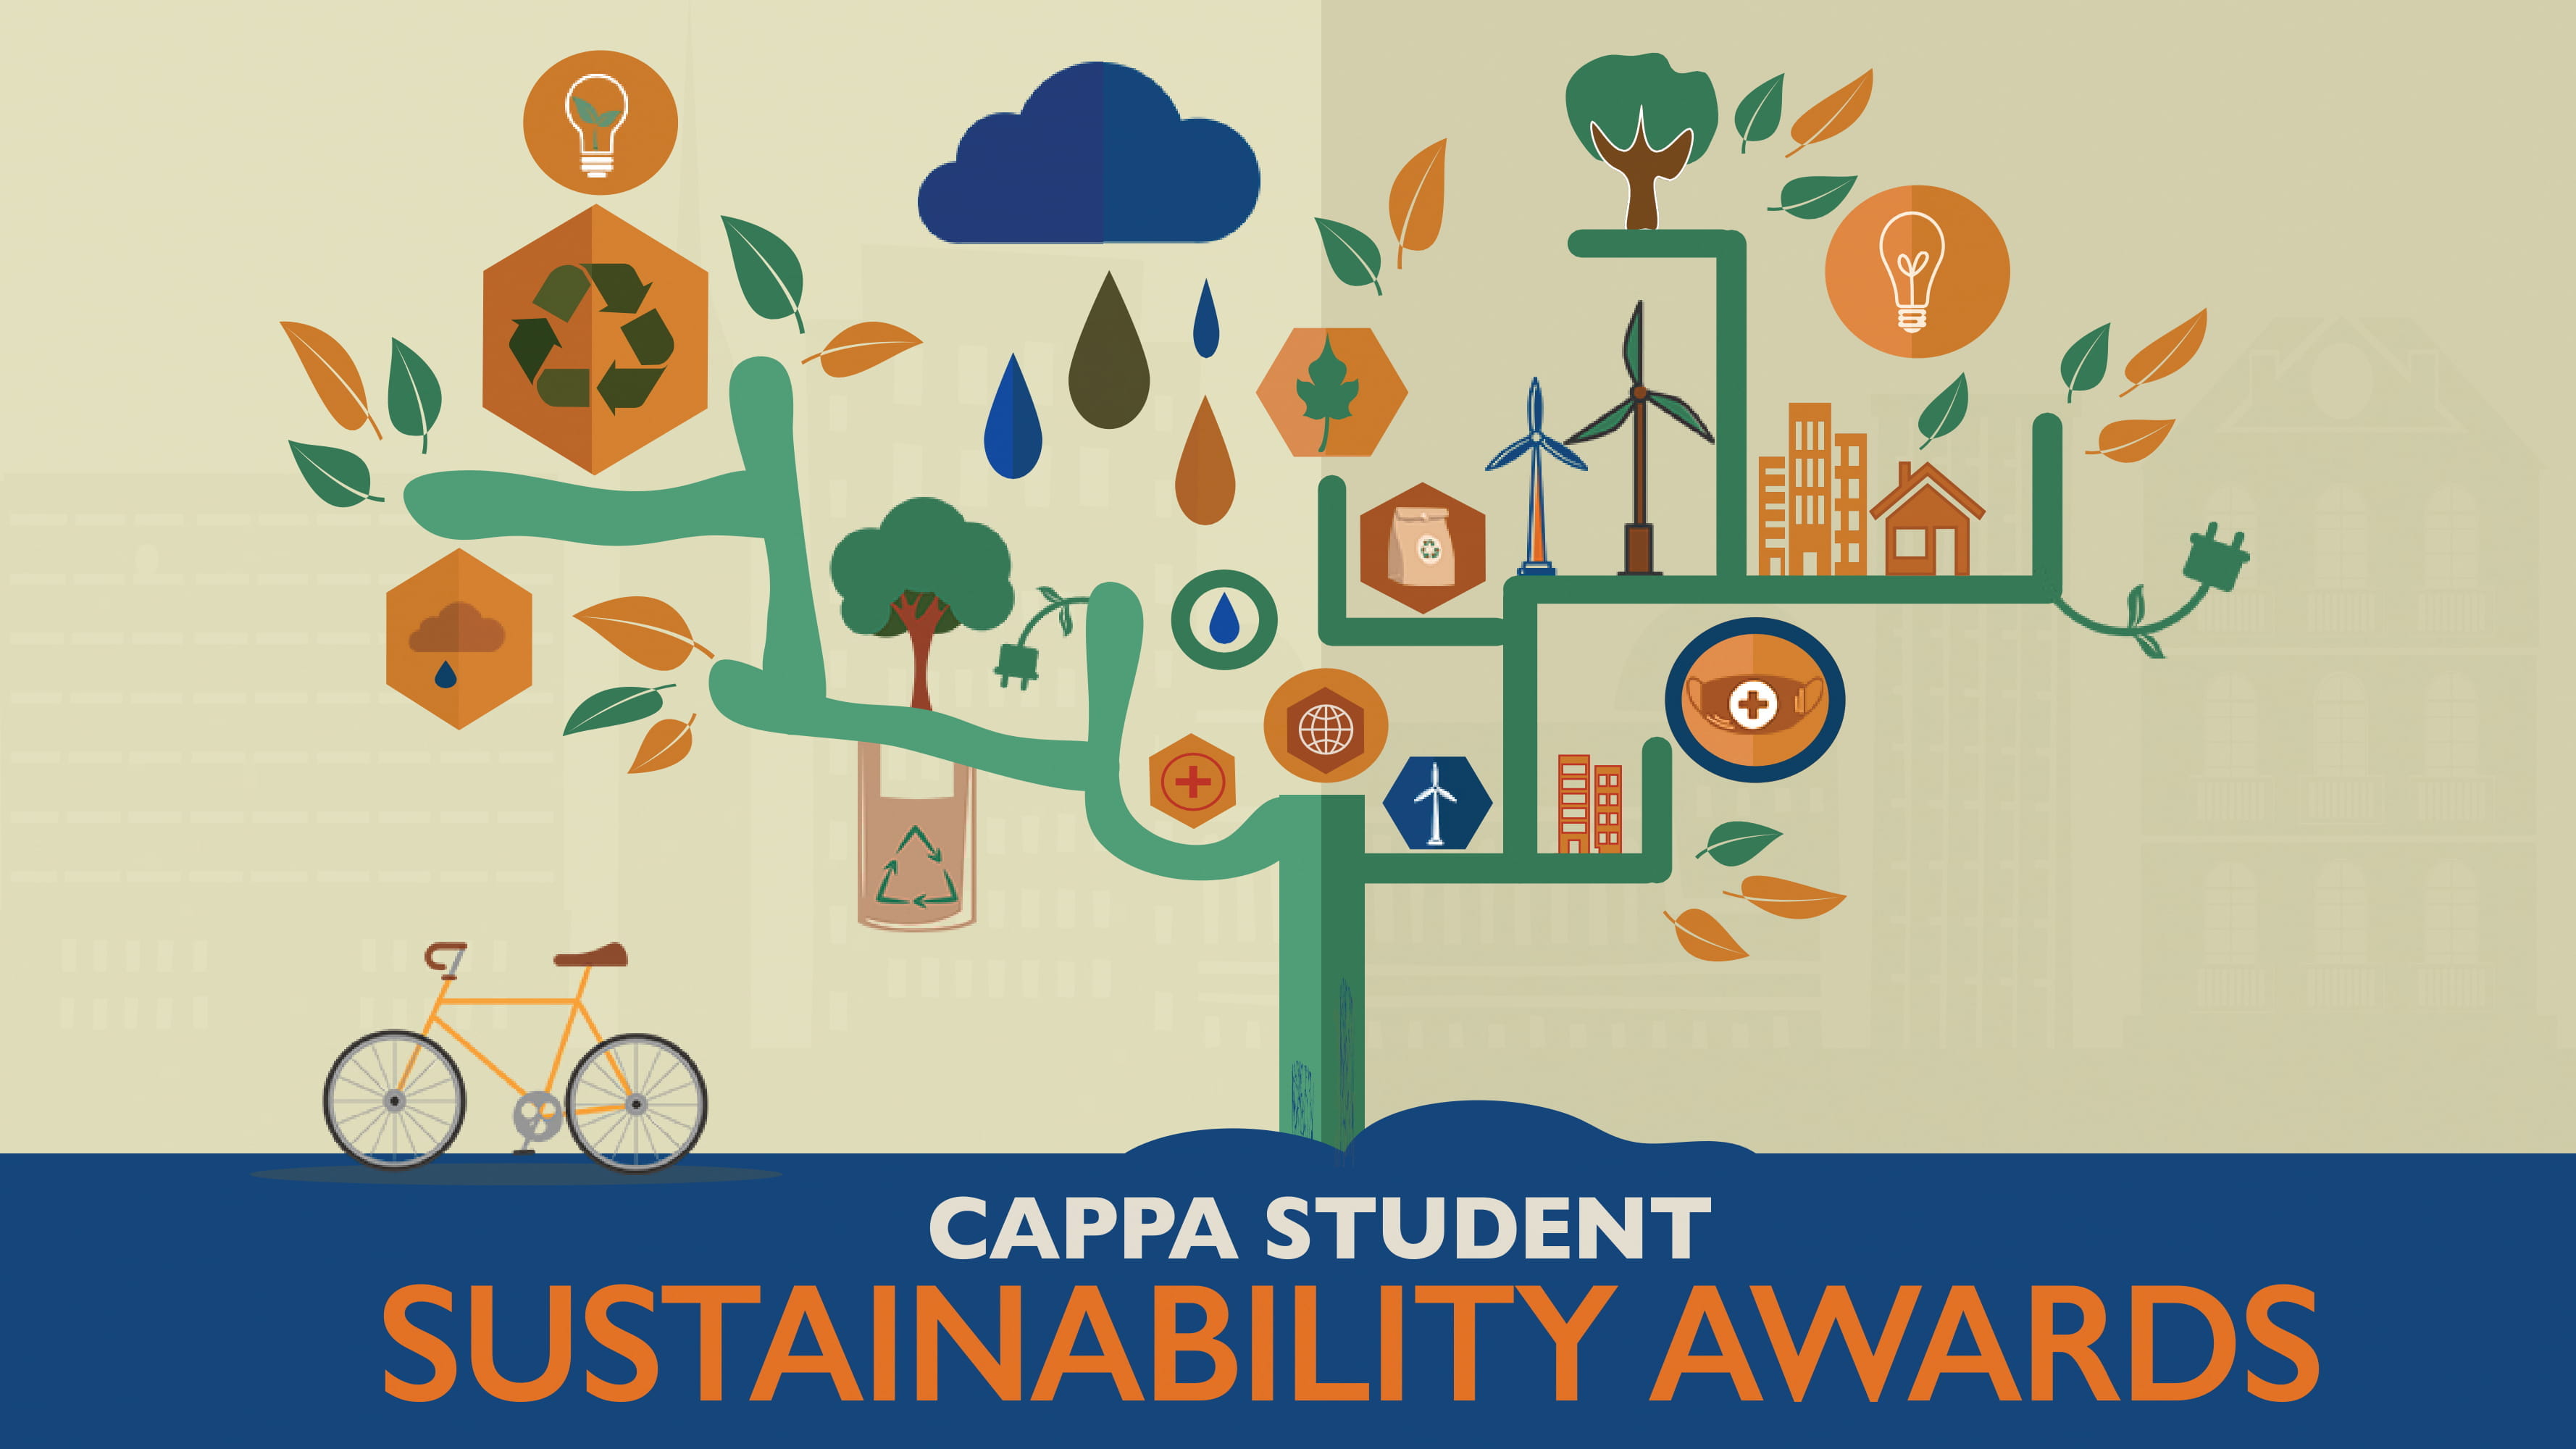 Cappa student sustainability awards graphic banner